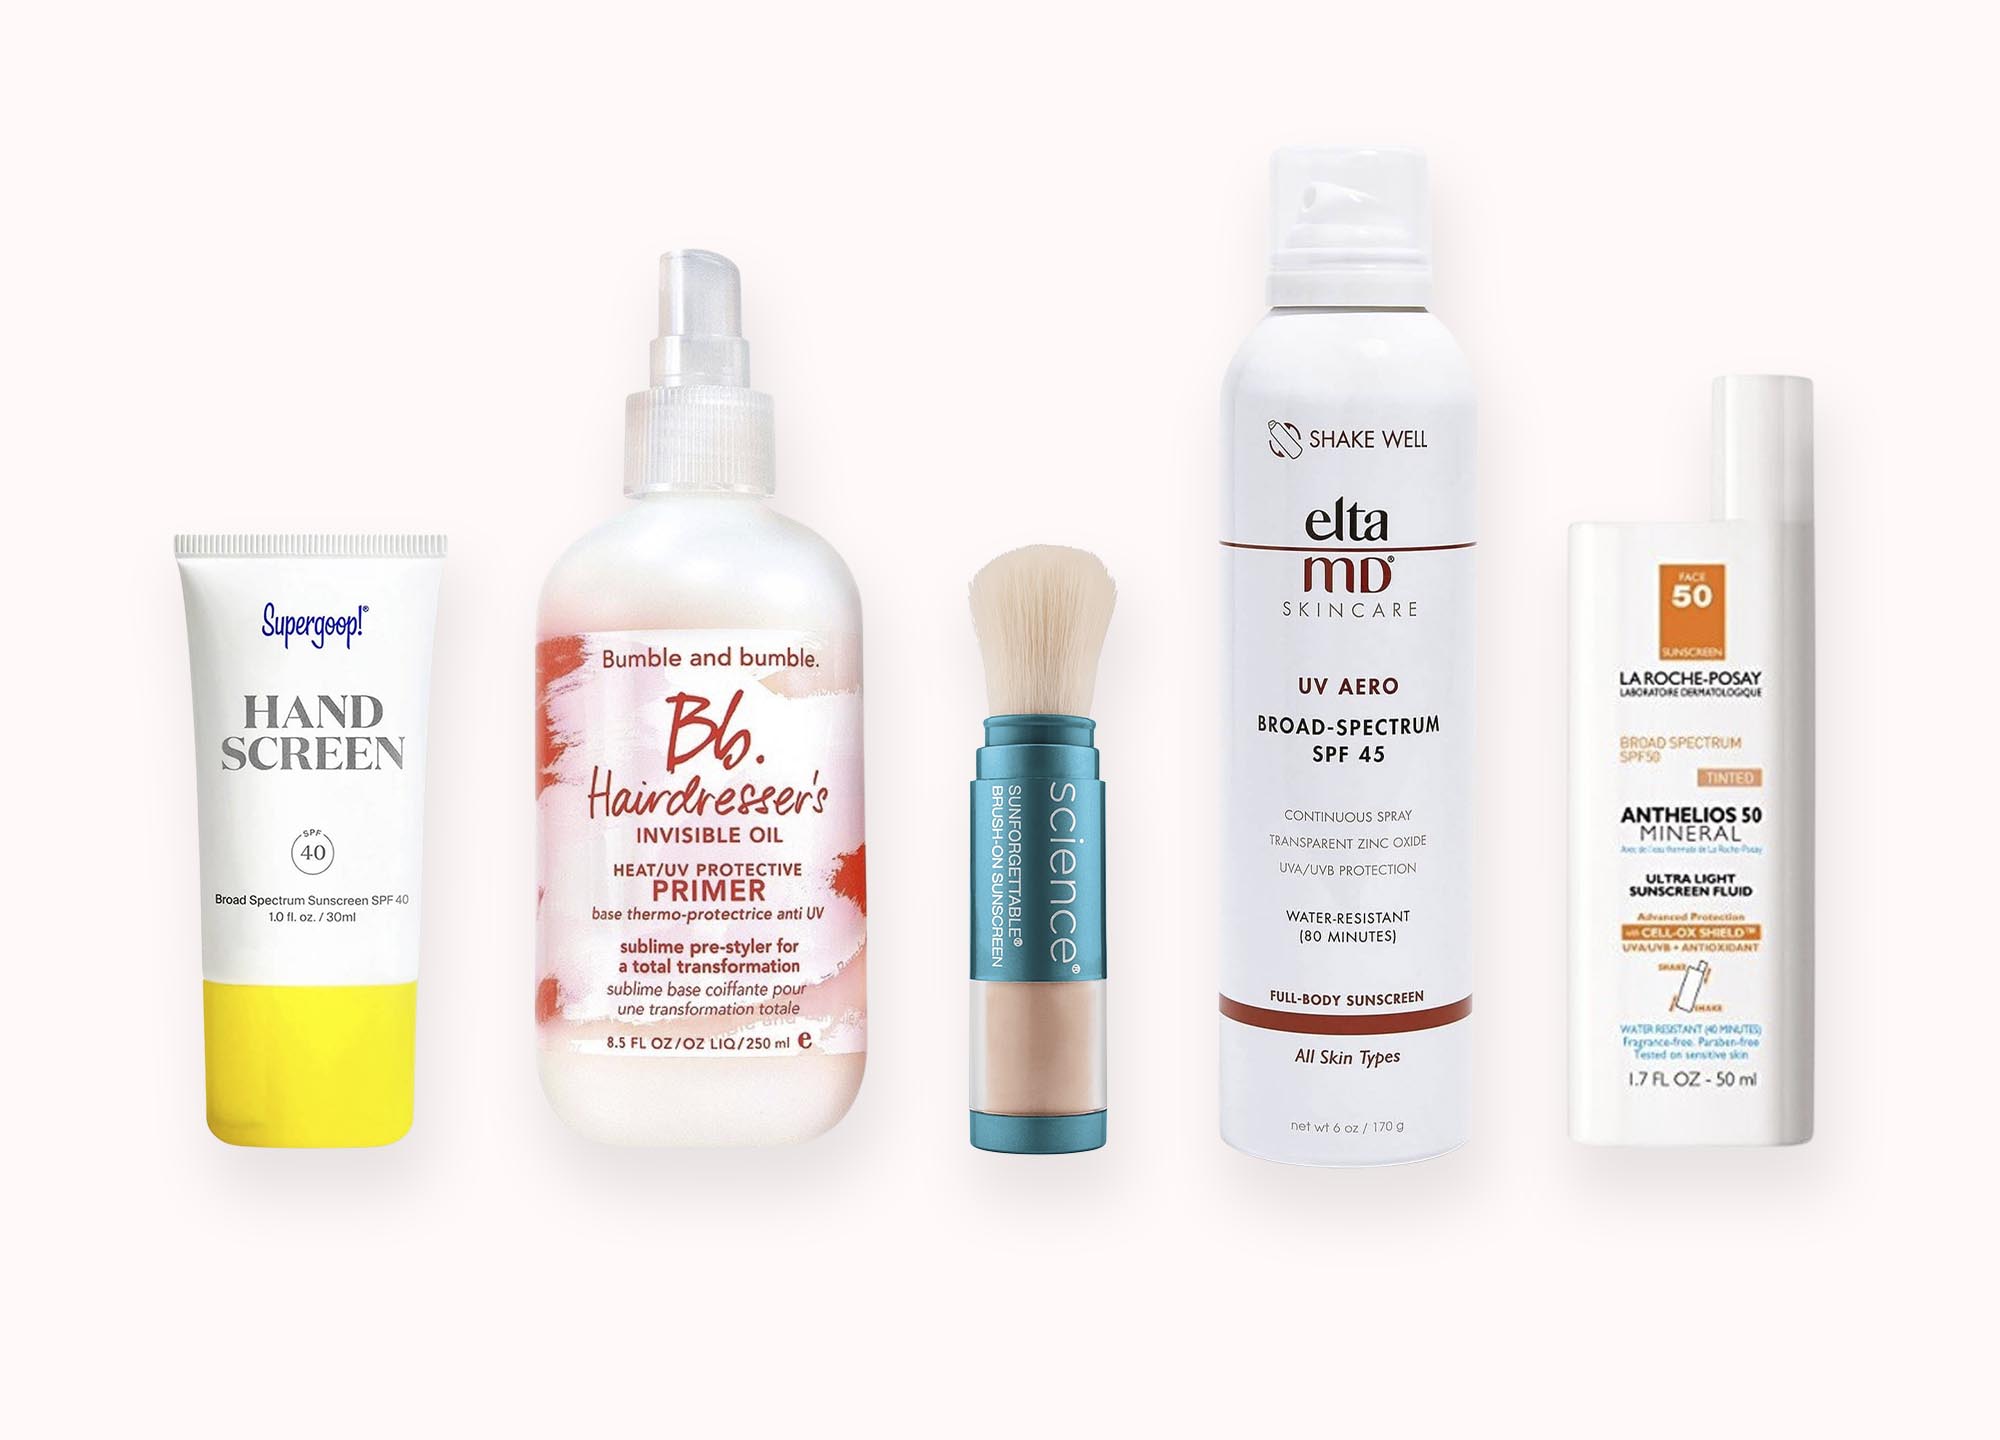 Sunscreens recommended by top dermatologists